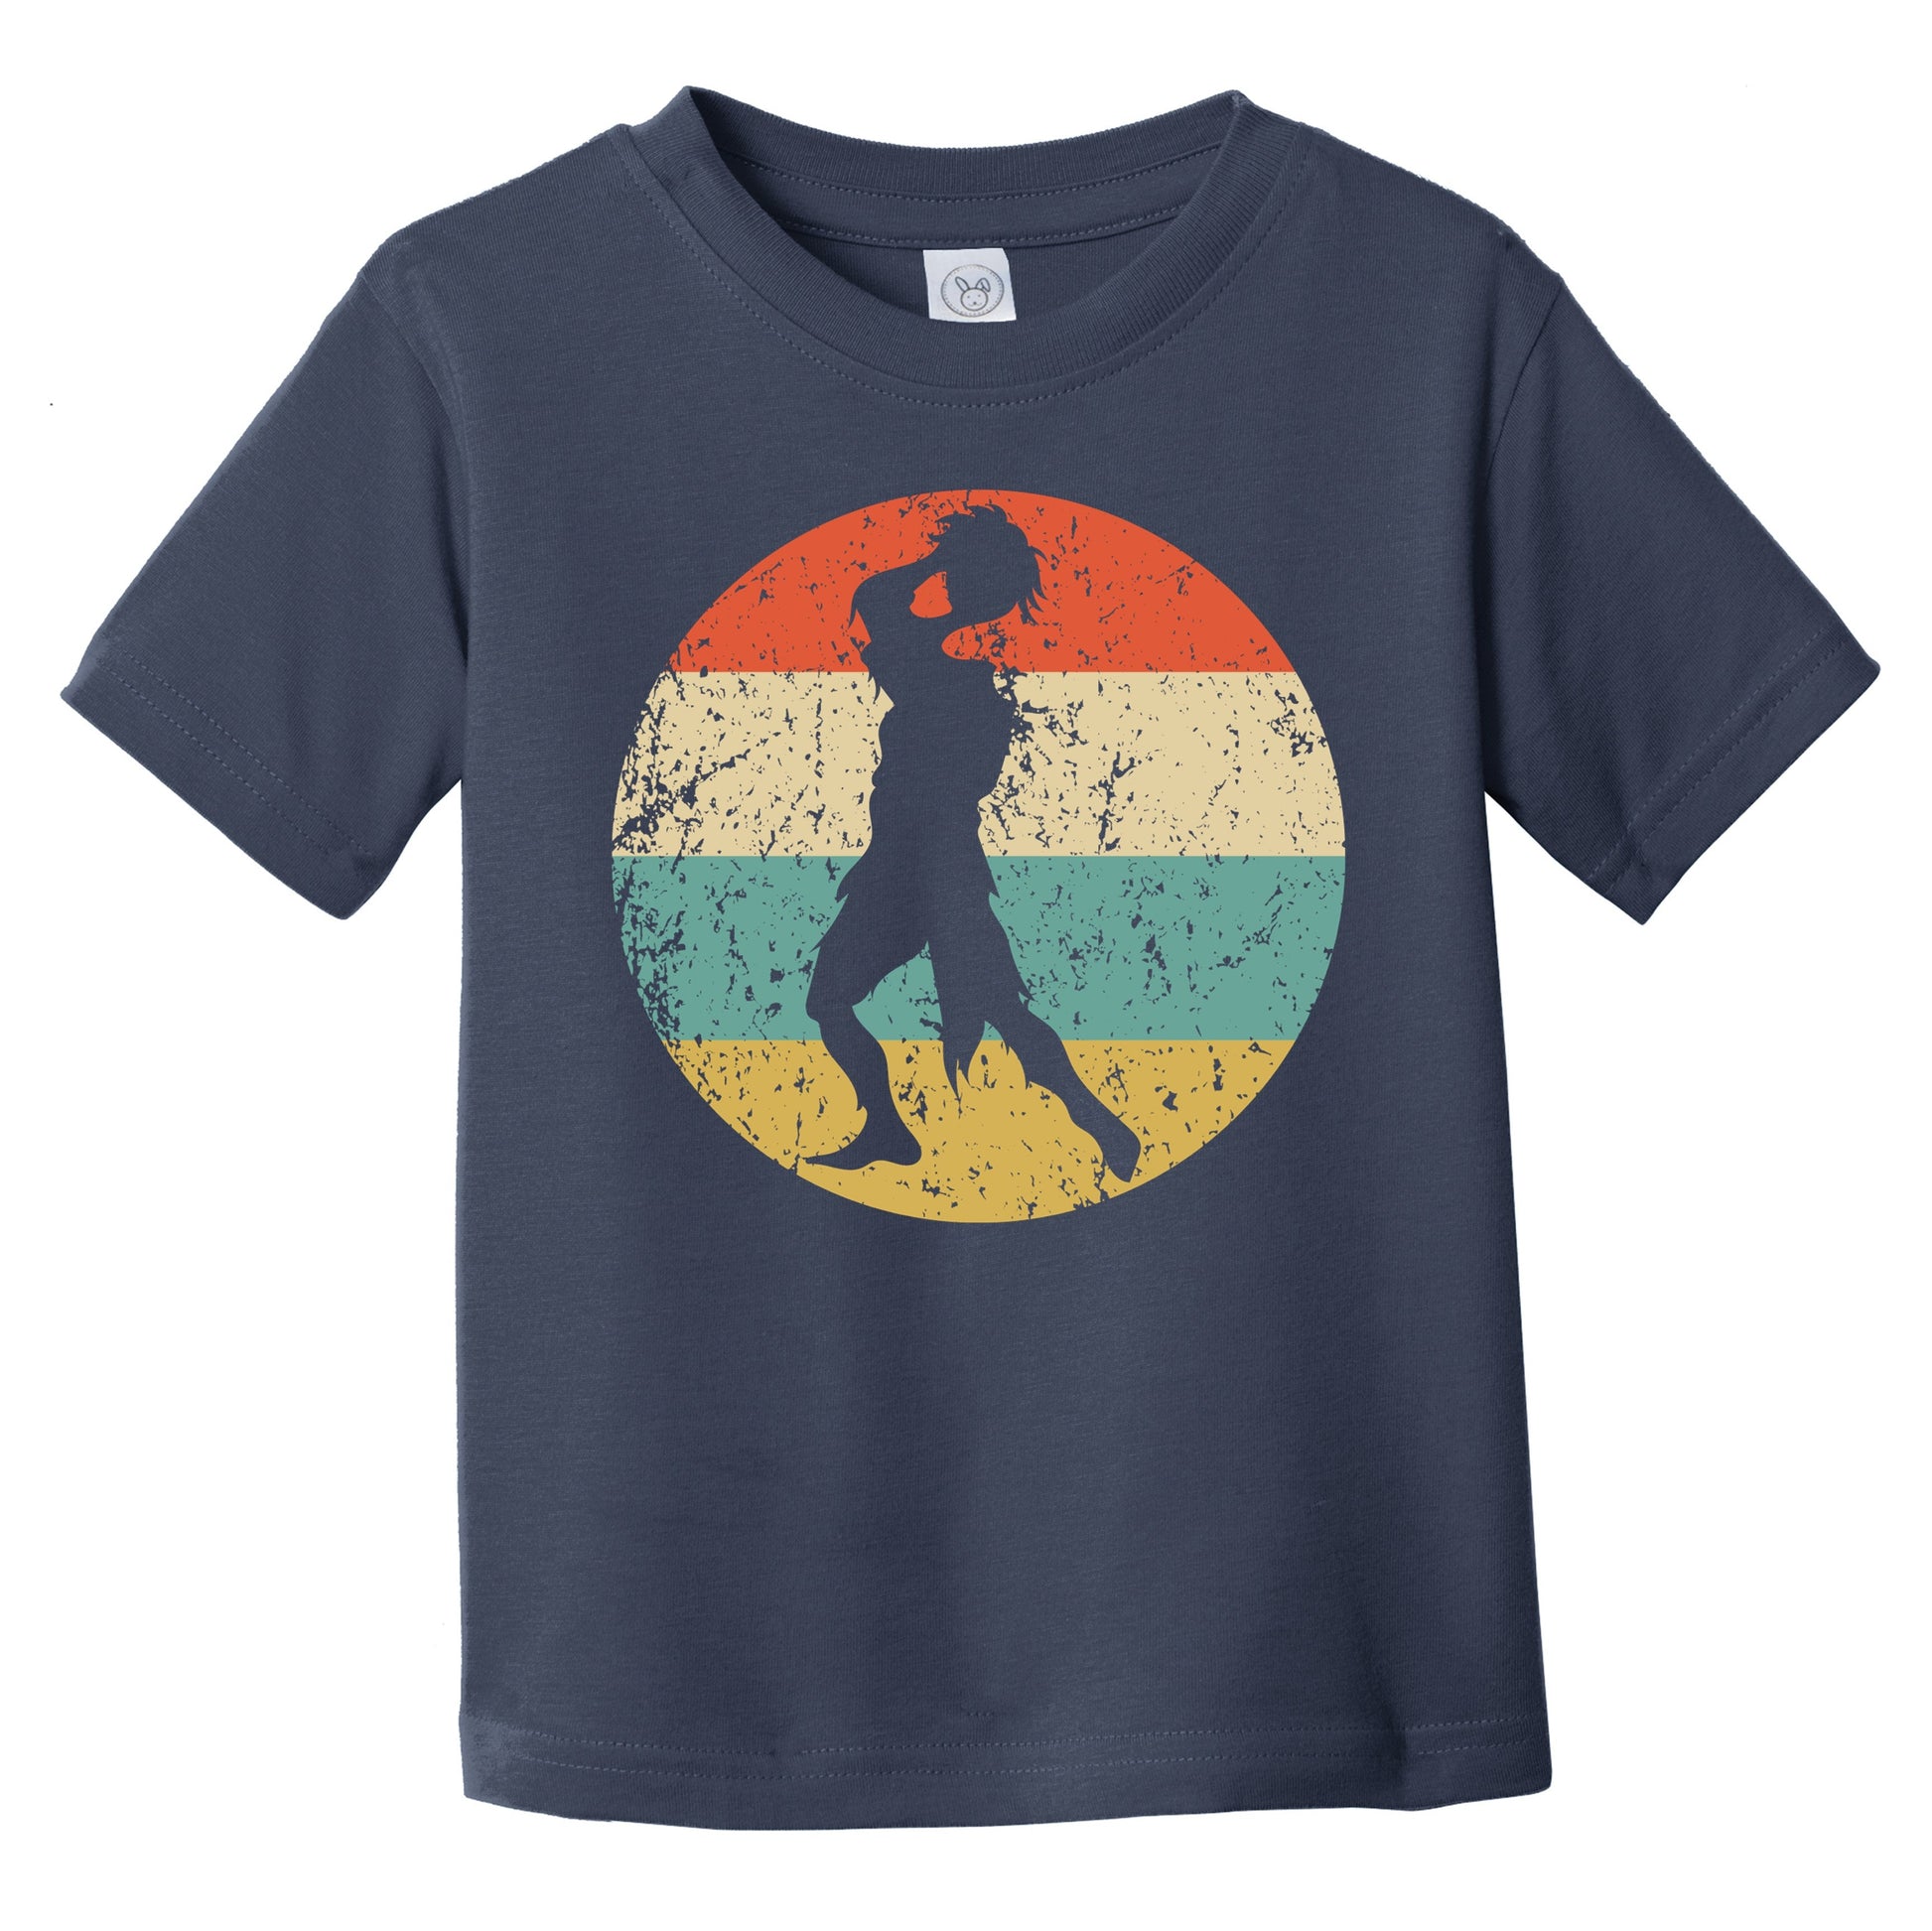 Halloween Spooky Scary Headless Zombie Silhouette Retro Infant Toddler T-Shirt